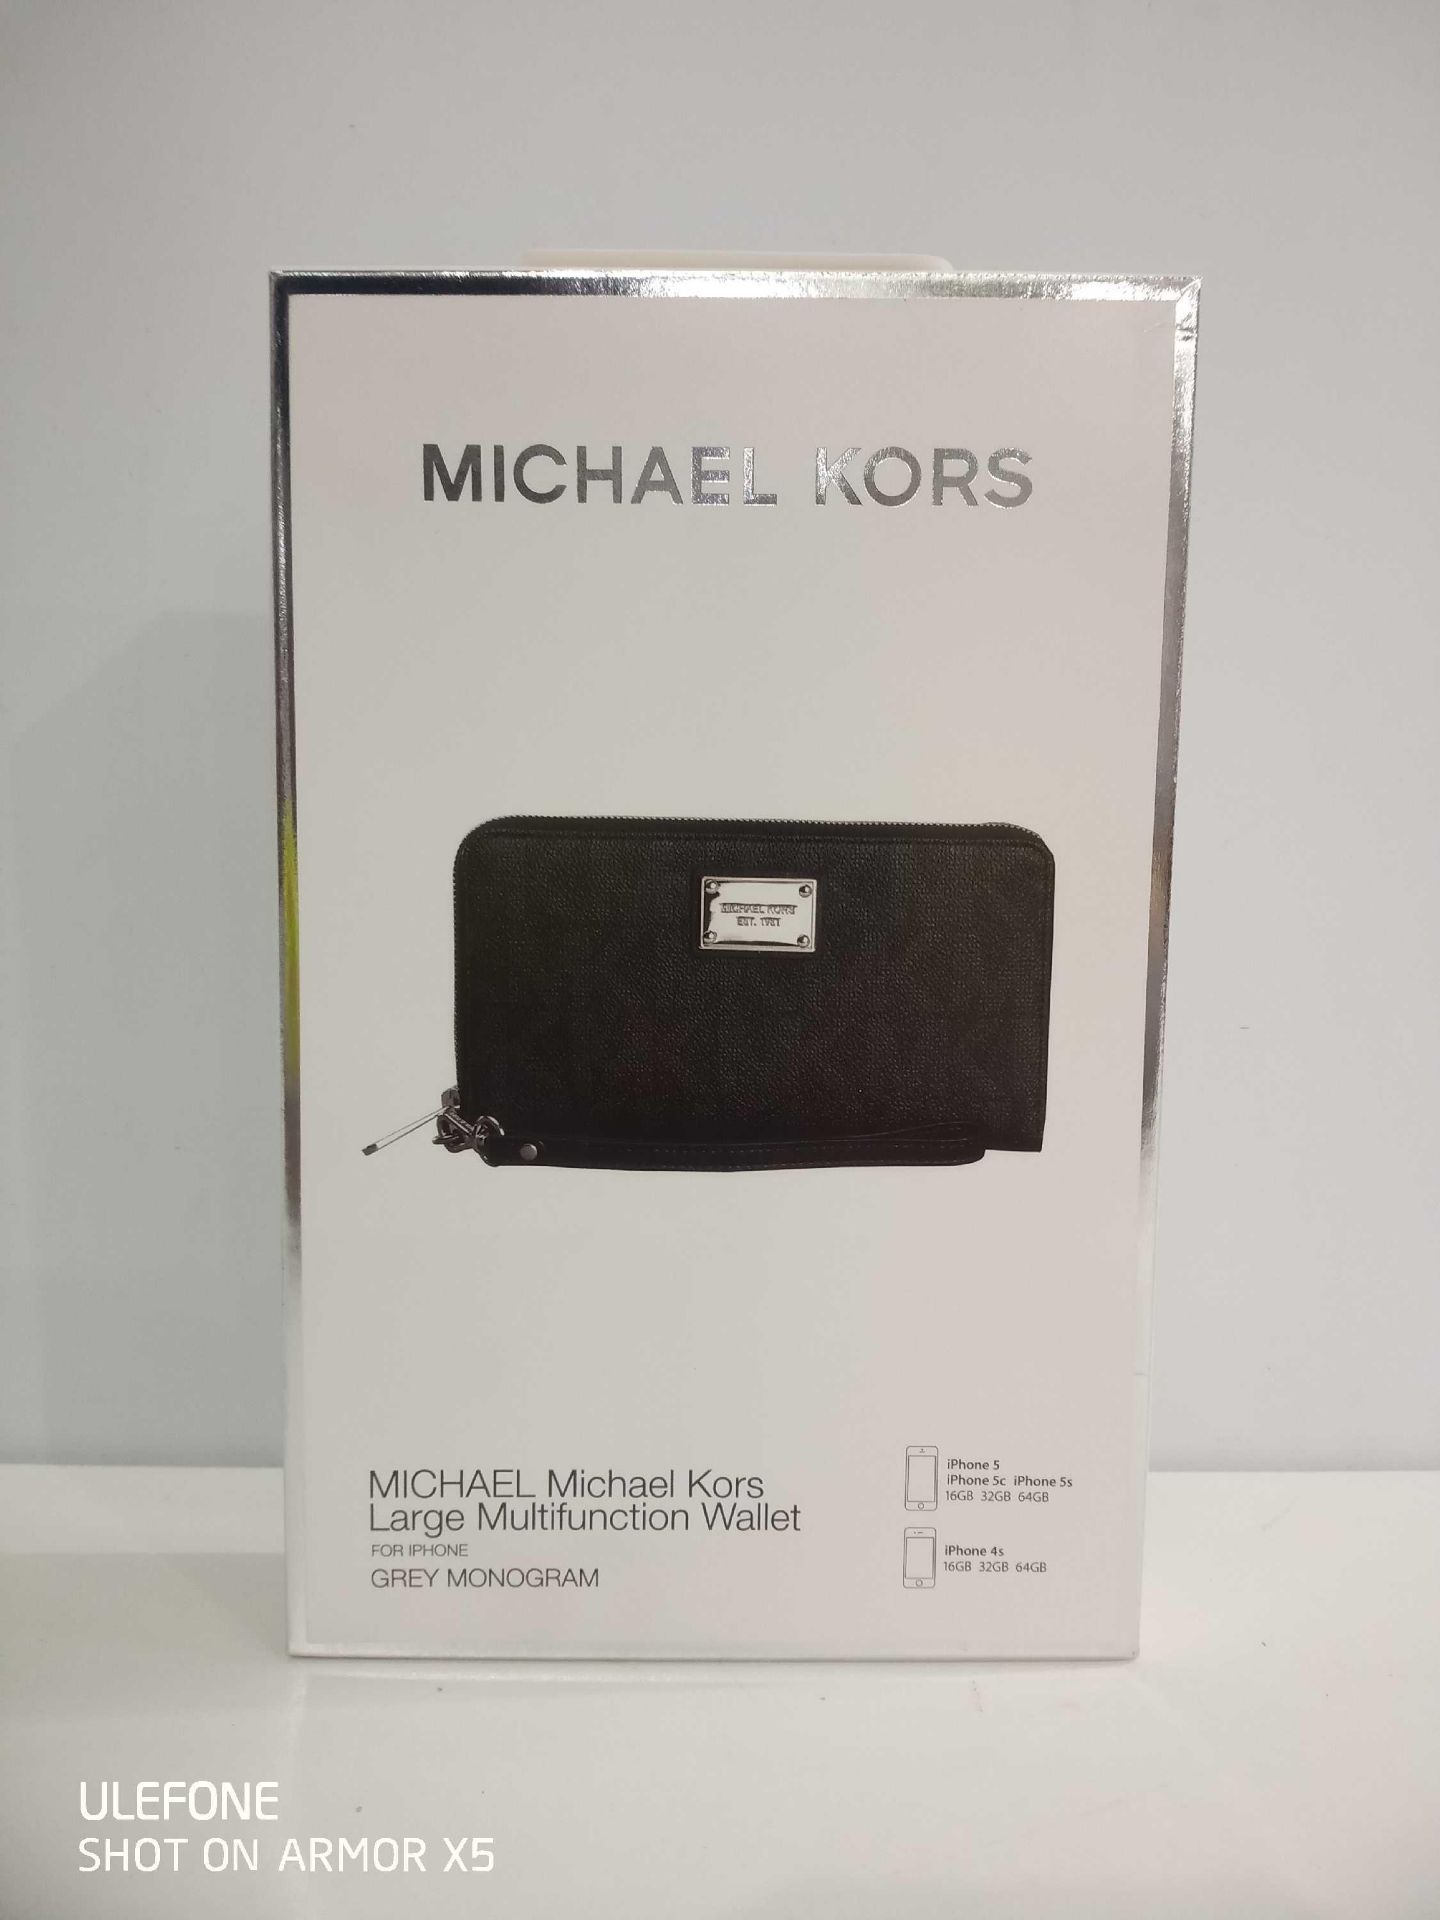 RRP £100 Boxed Michael Kors Grey Monogram Large Multifunction Purse Or Wallet For Iphone 5 - Image 6 of 6